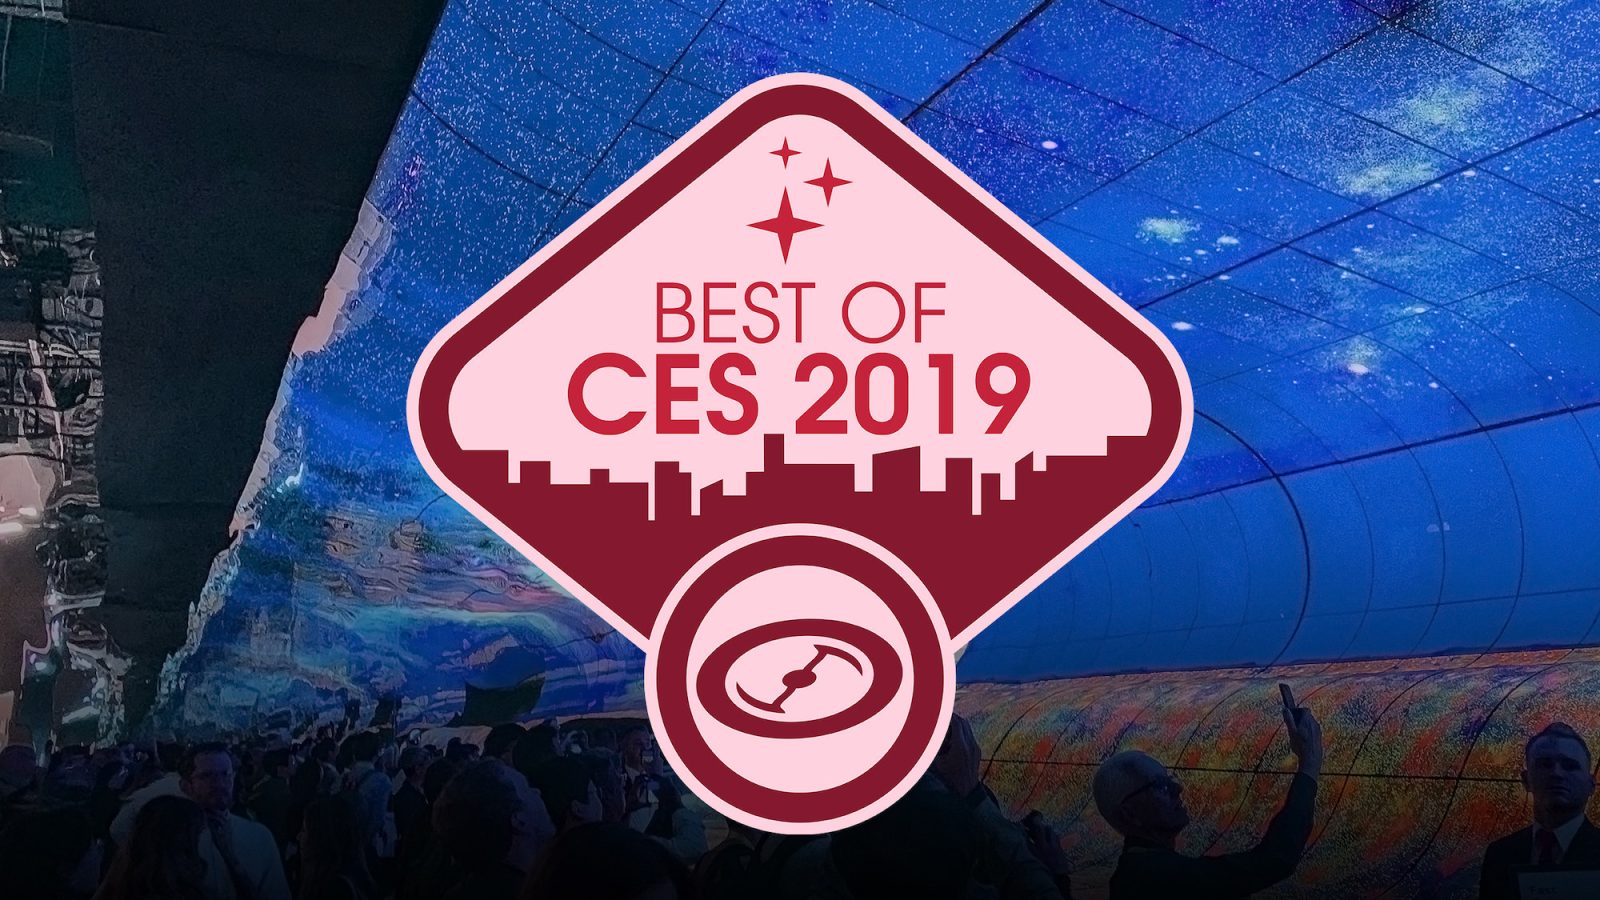 DroneDJ's Best of CES 2019 Awards: DJI Smart Controller, Draco 4x4 and more